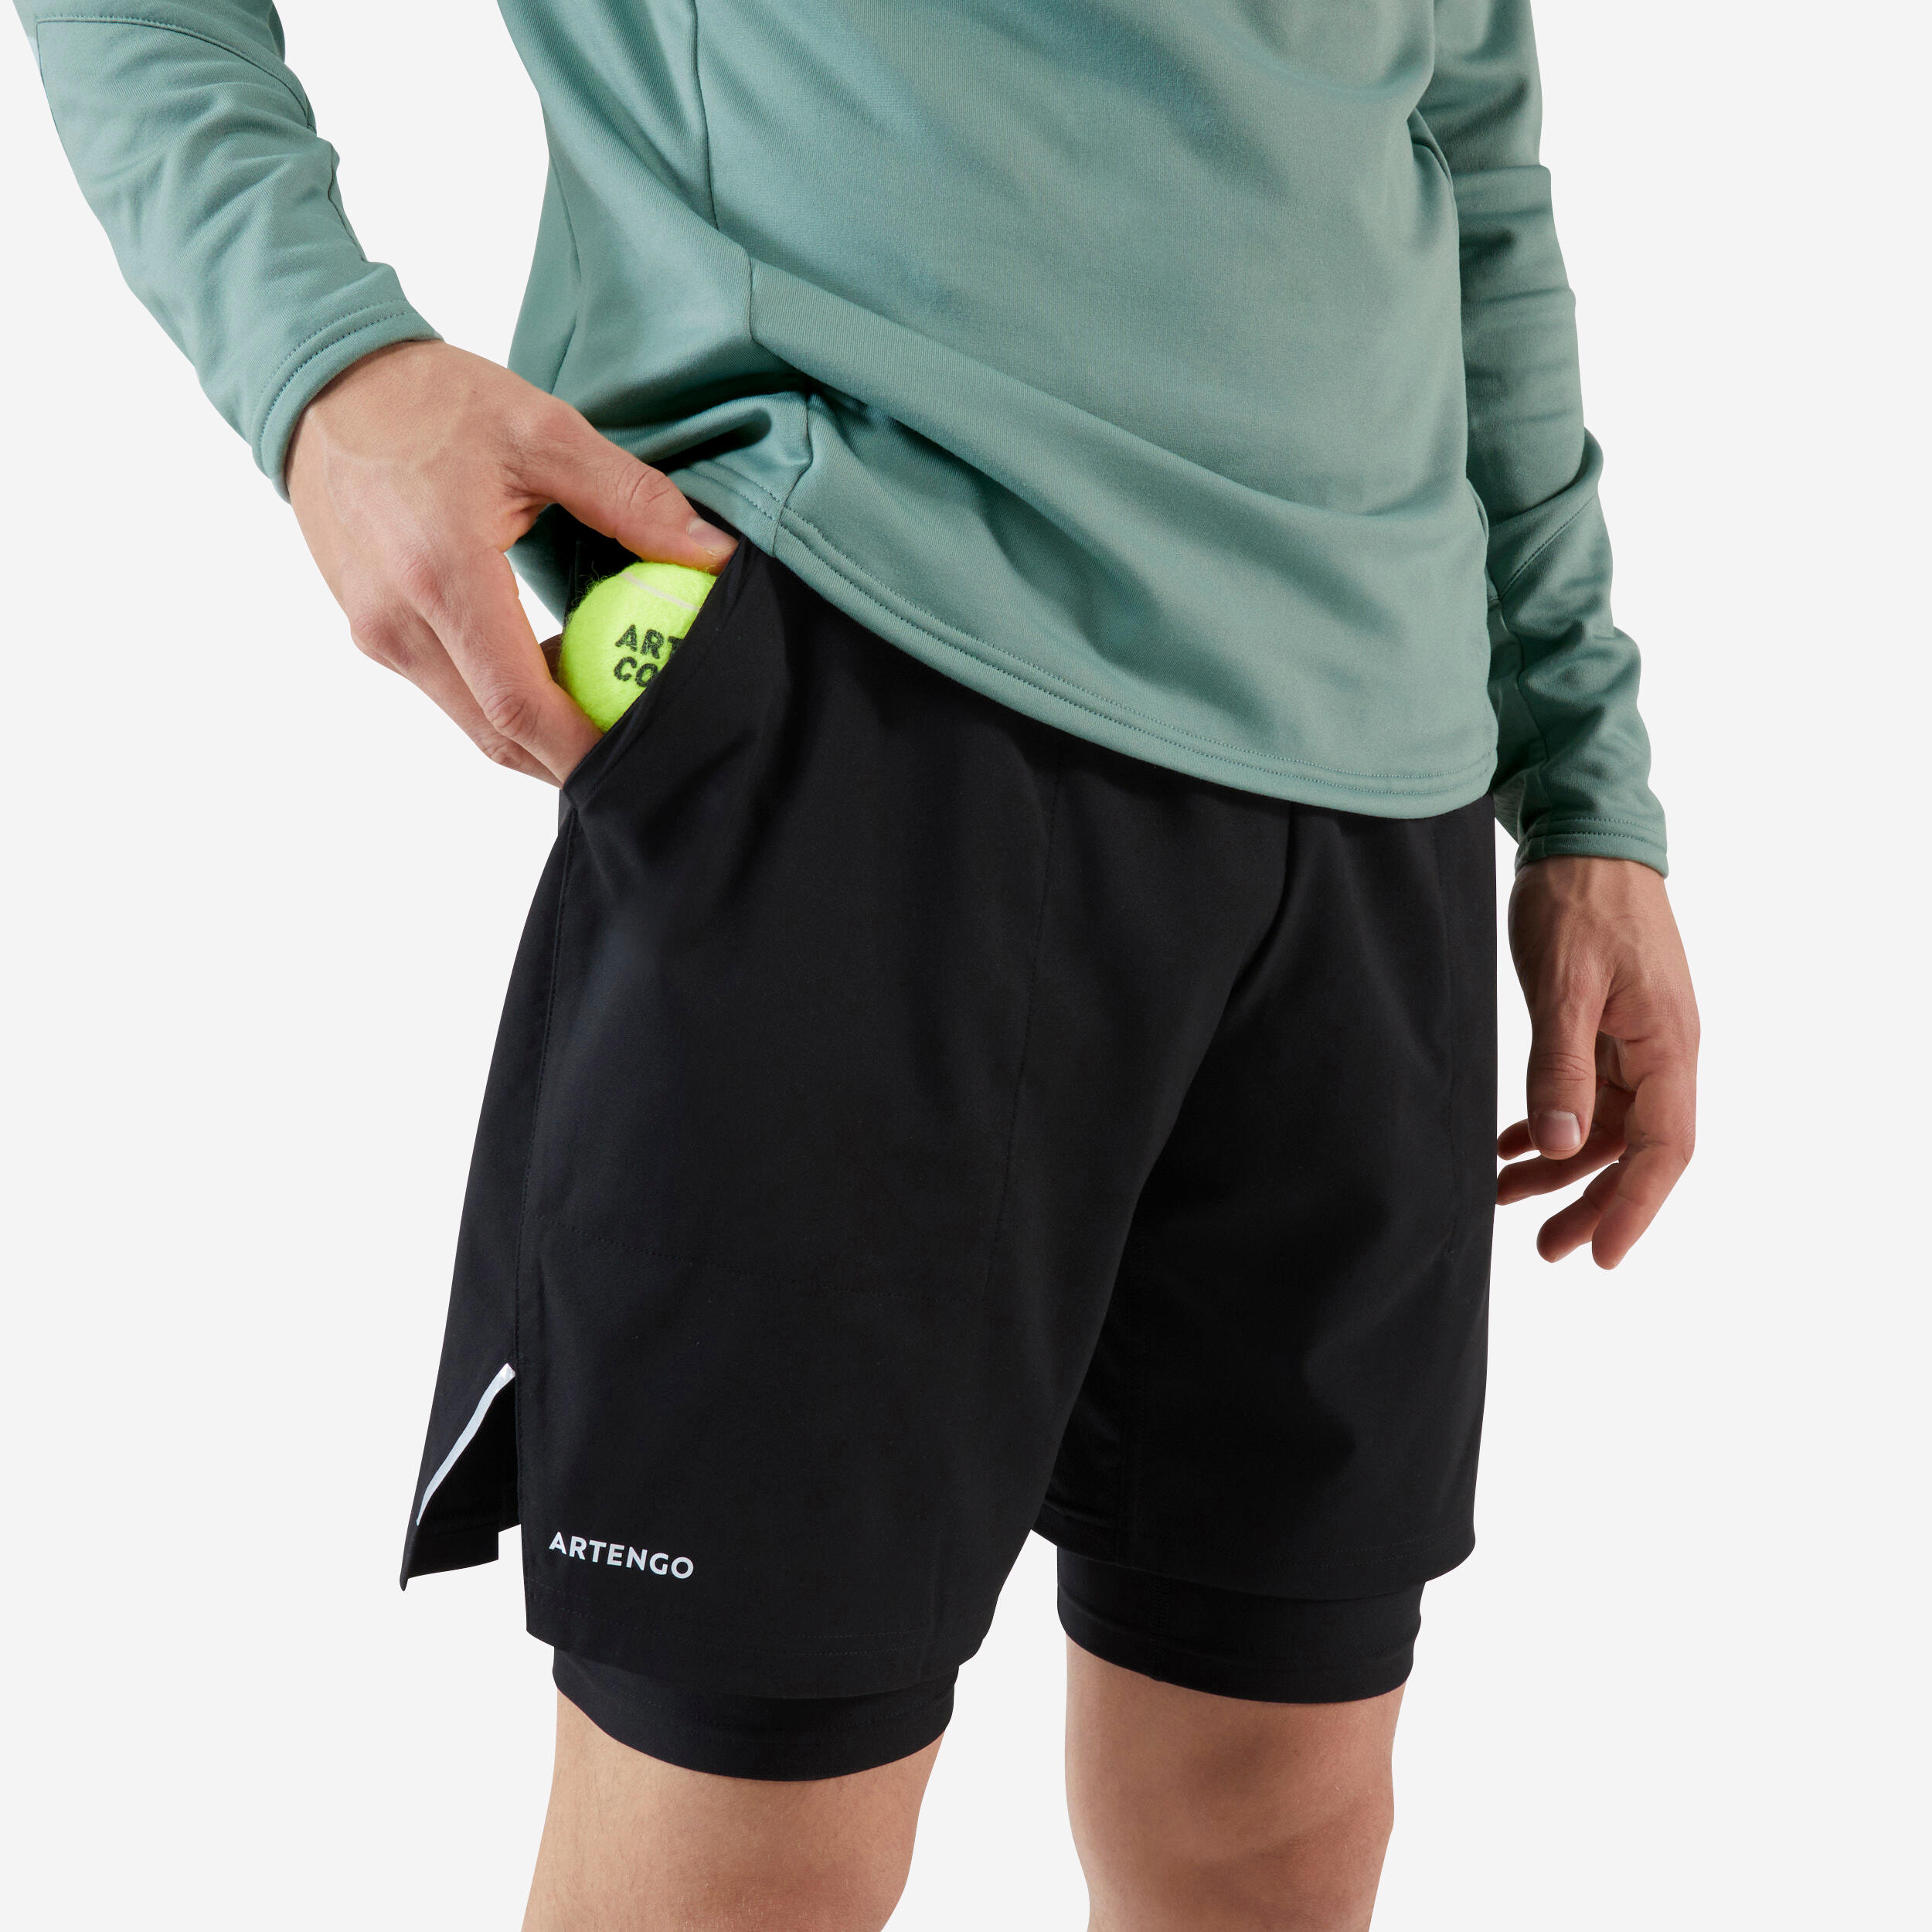 Men's Tennis 2-in-1 Shorts and Undershorts Thermic - Black/Black 1/8